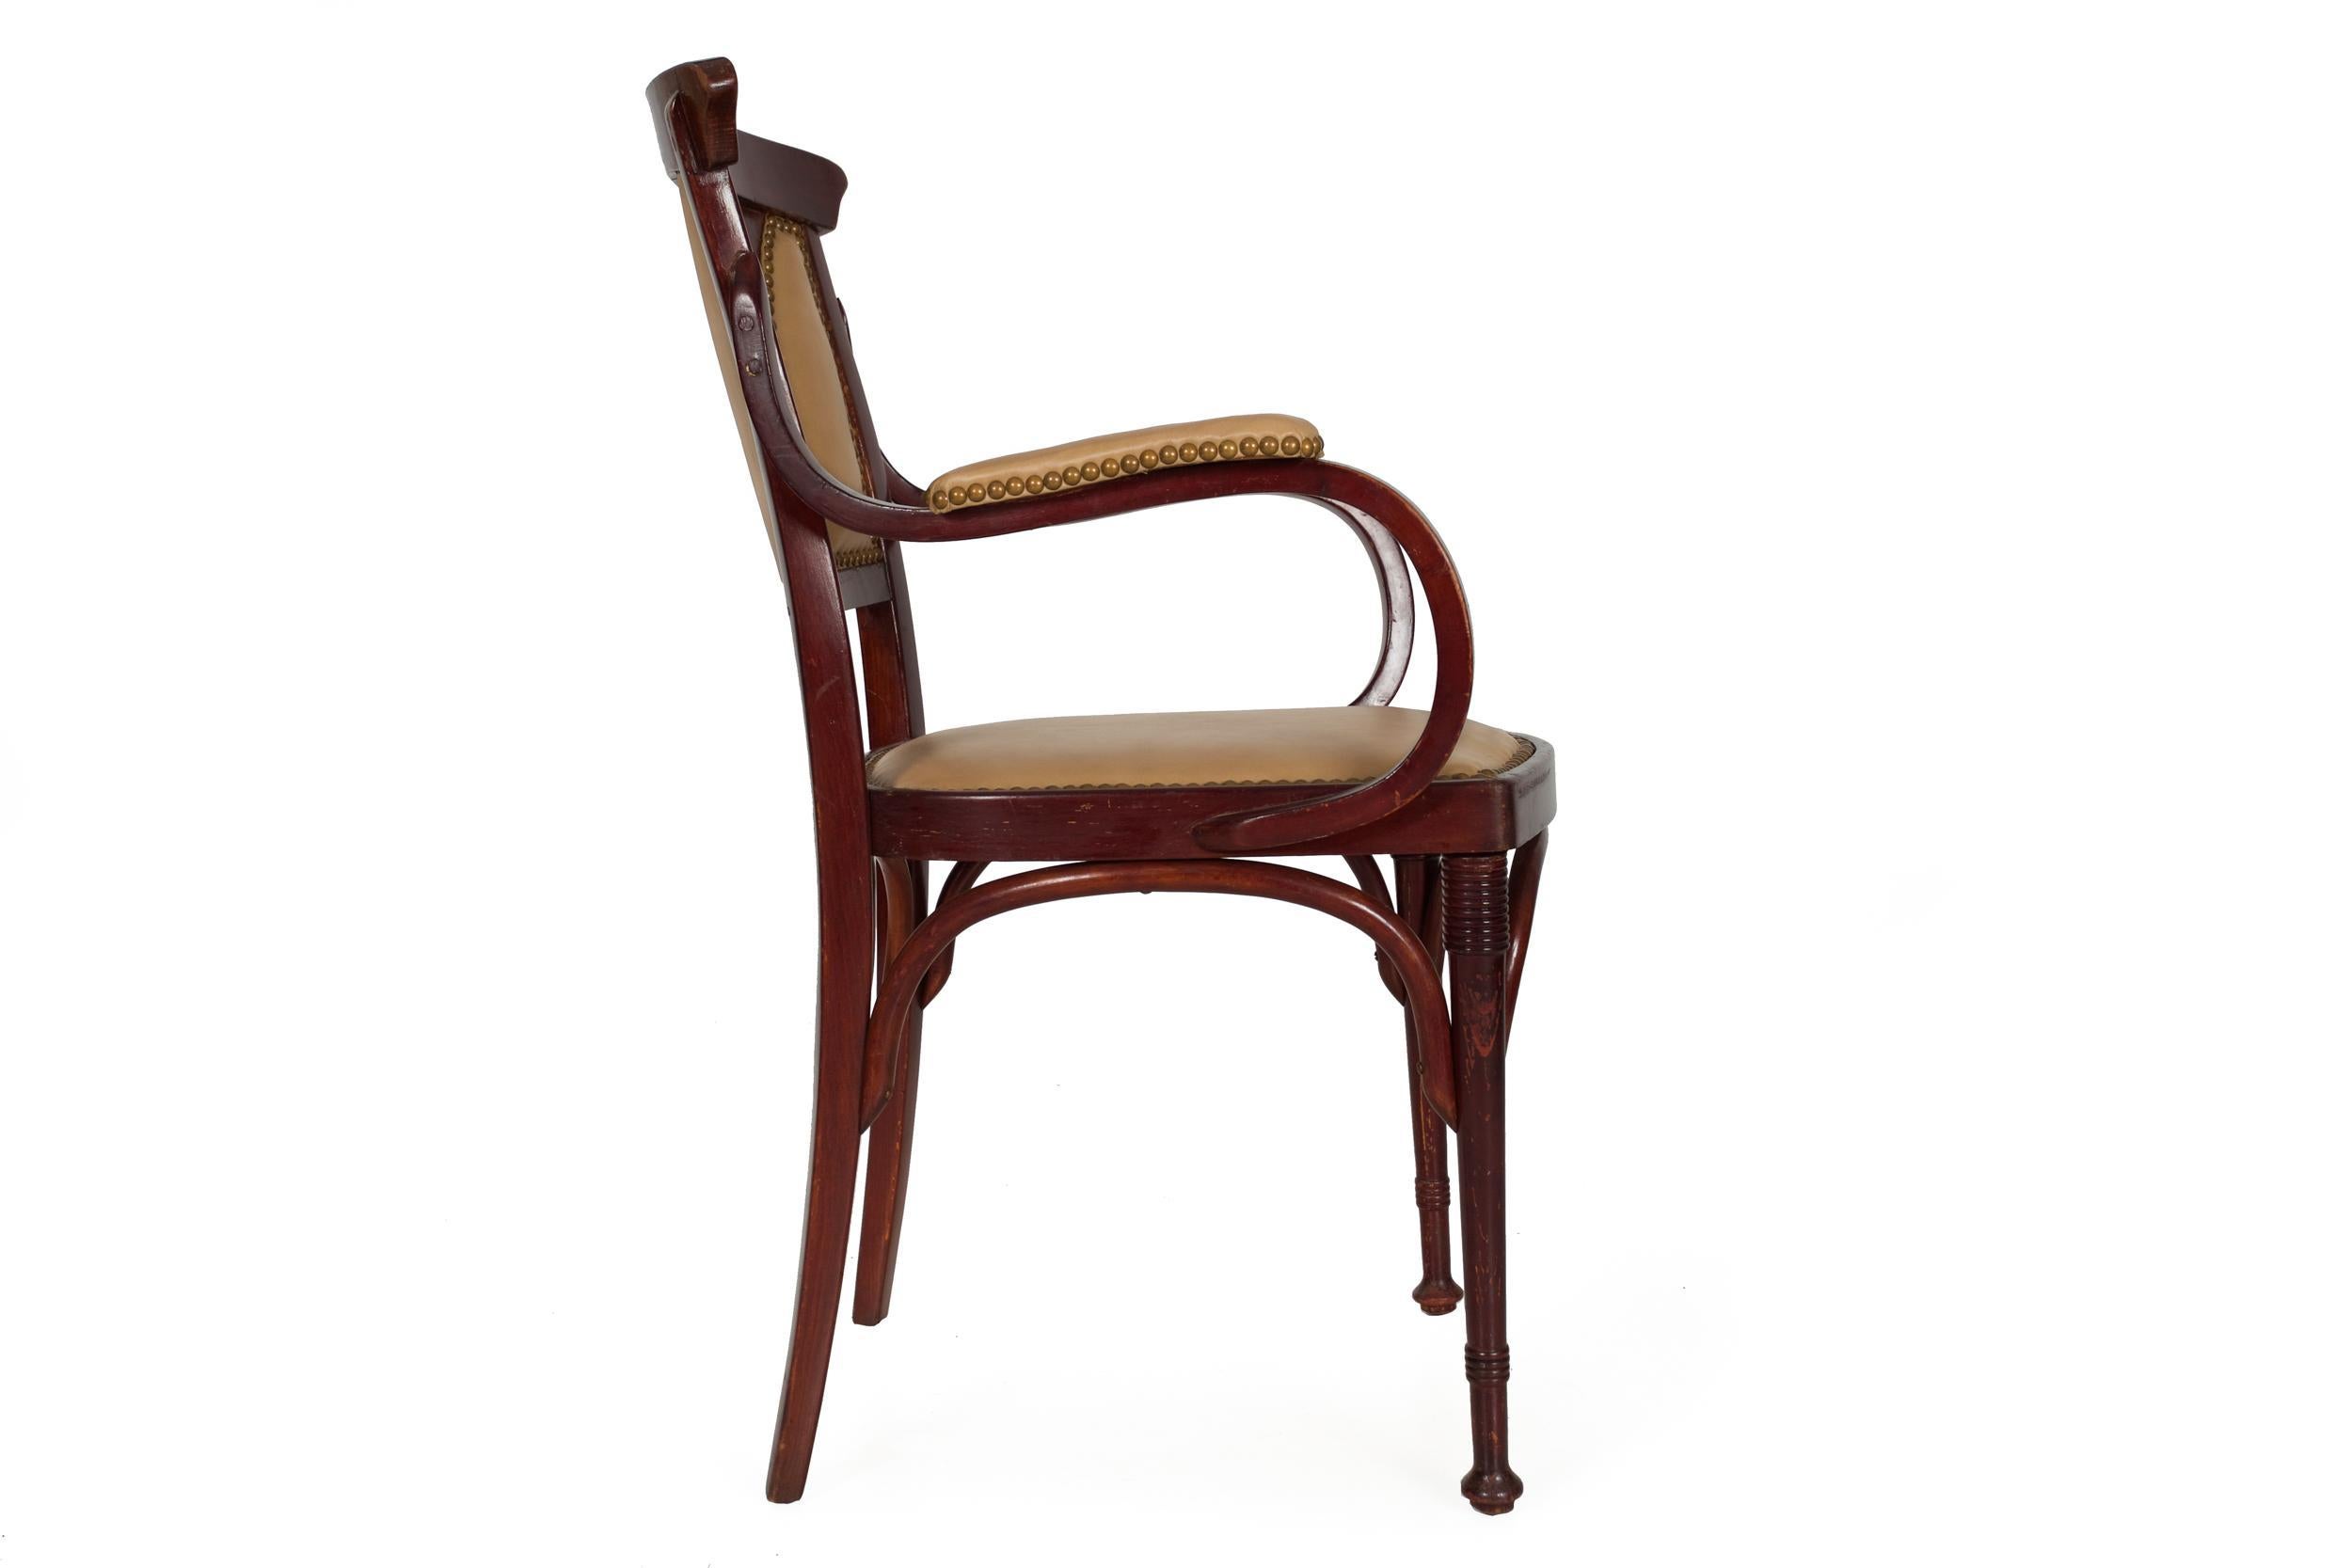 Vienna Secessionist Bentwood Arm Chair by Jacob & Josef Kohn In Good Condition For Sale In Shippensburg, PA